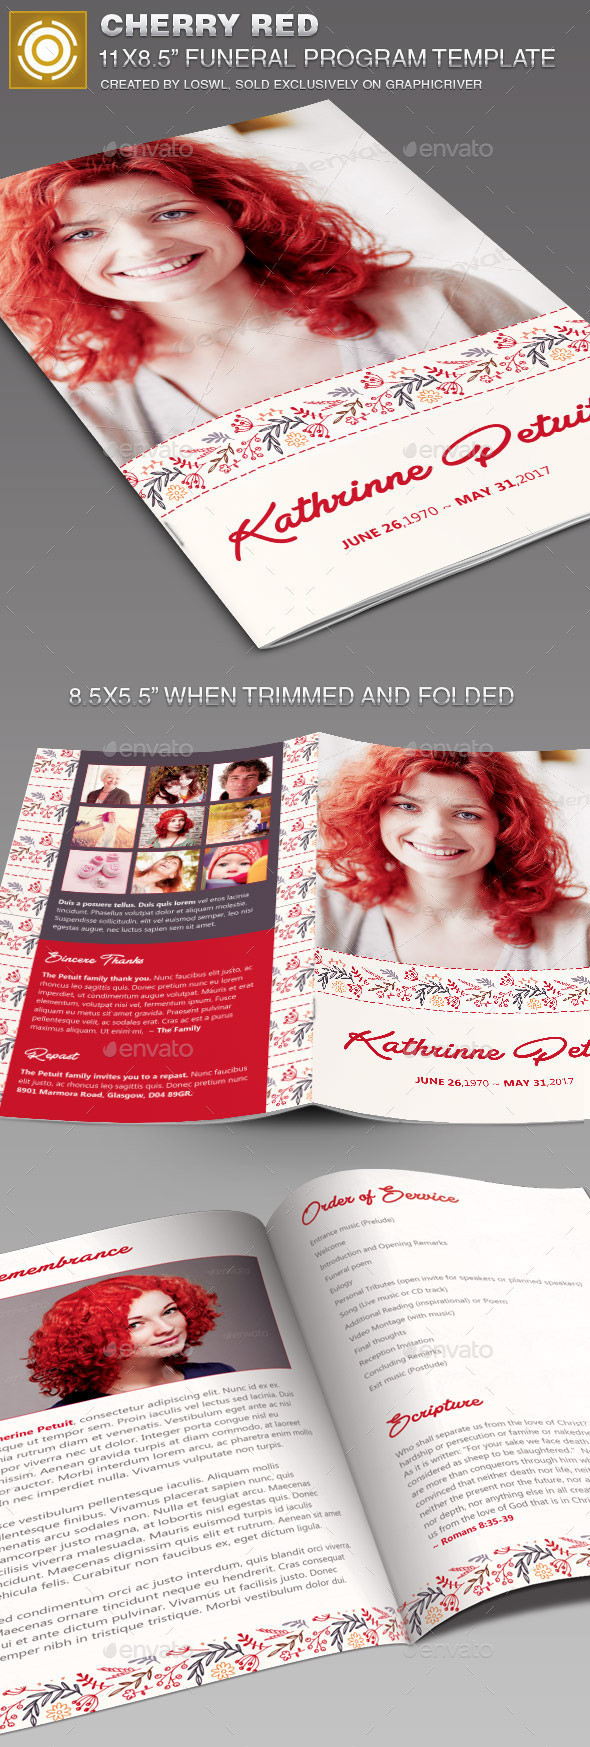 Cherry red funeral program image preview